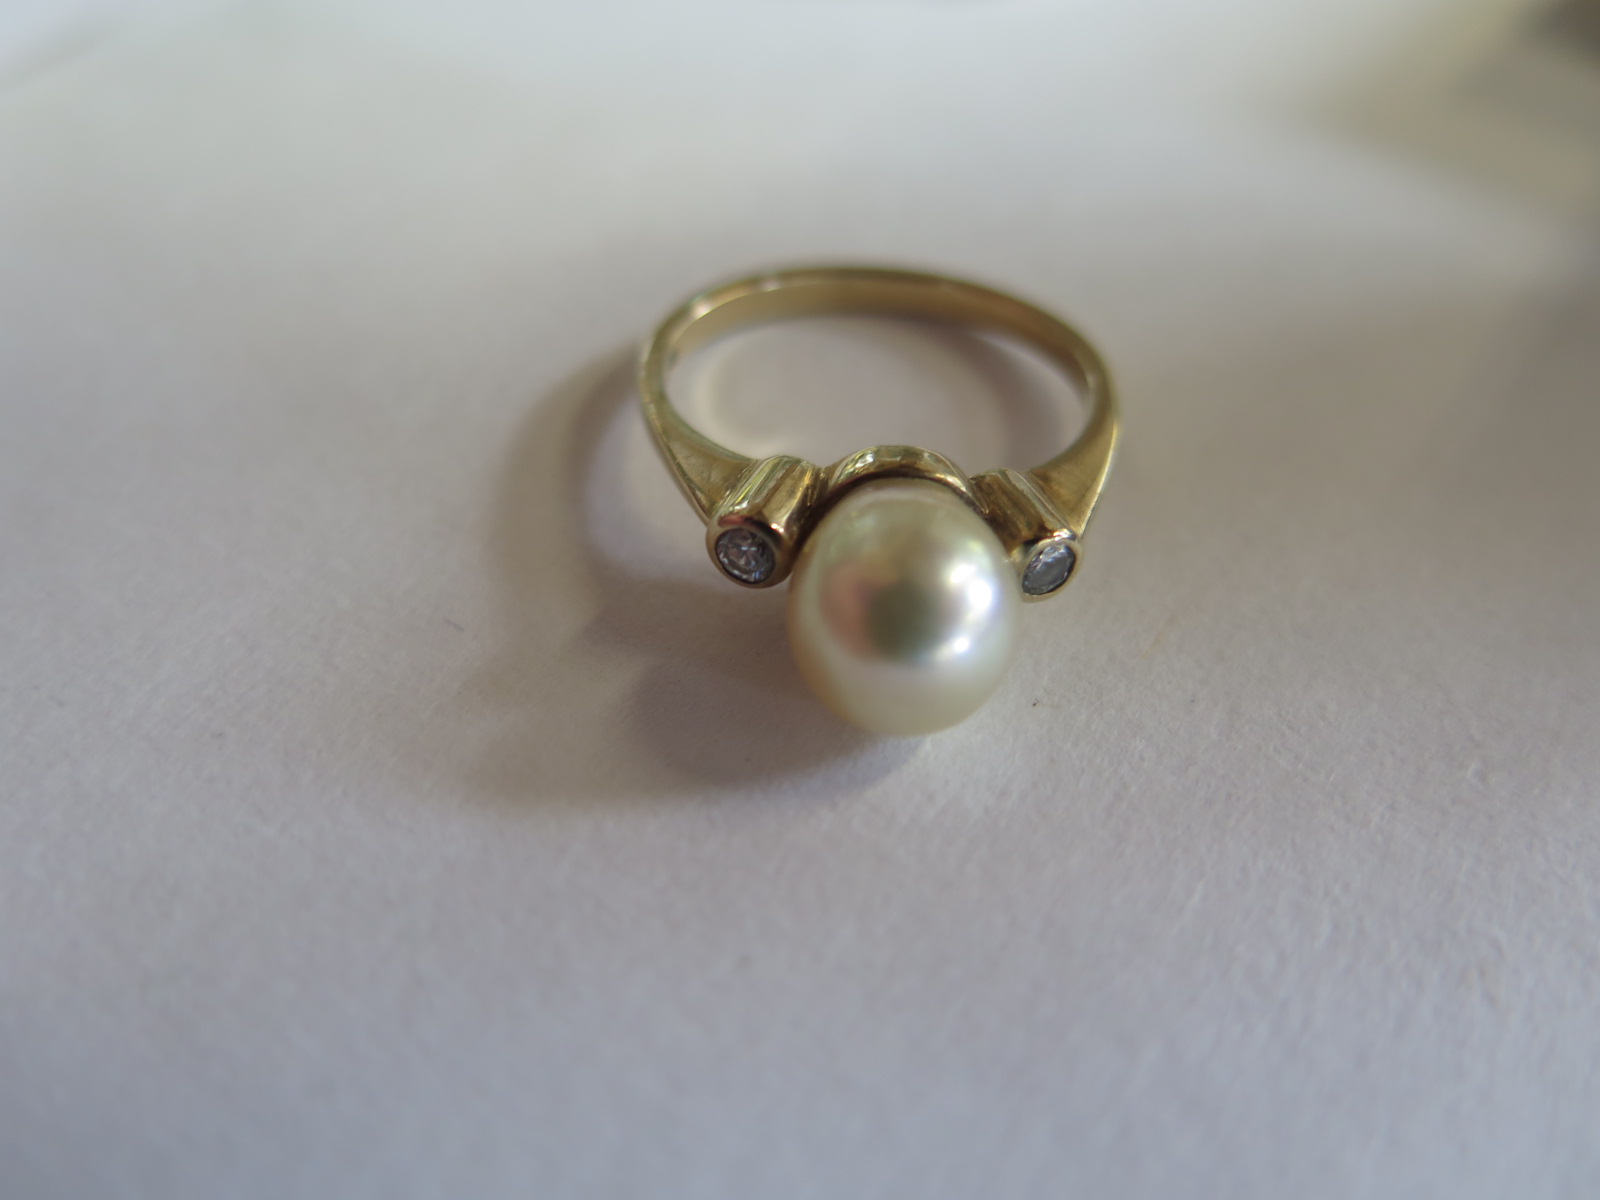 A hallmarked 9ct yellow gold pearl and diamond ring - size P, approx 3.5 grams - pearl 7x8mm